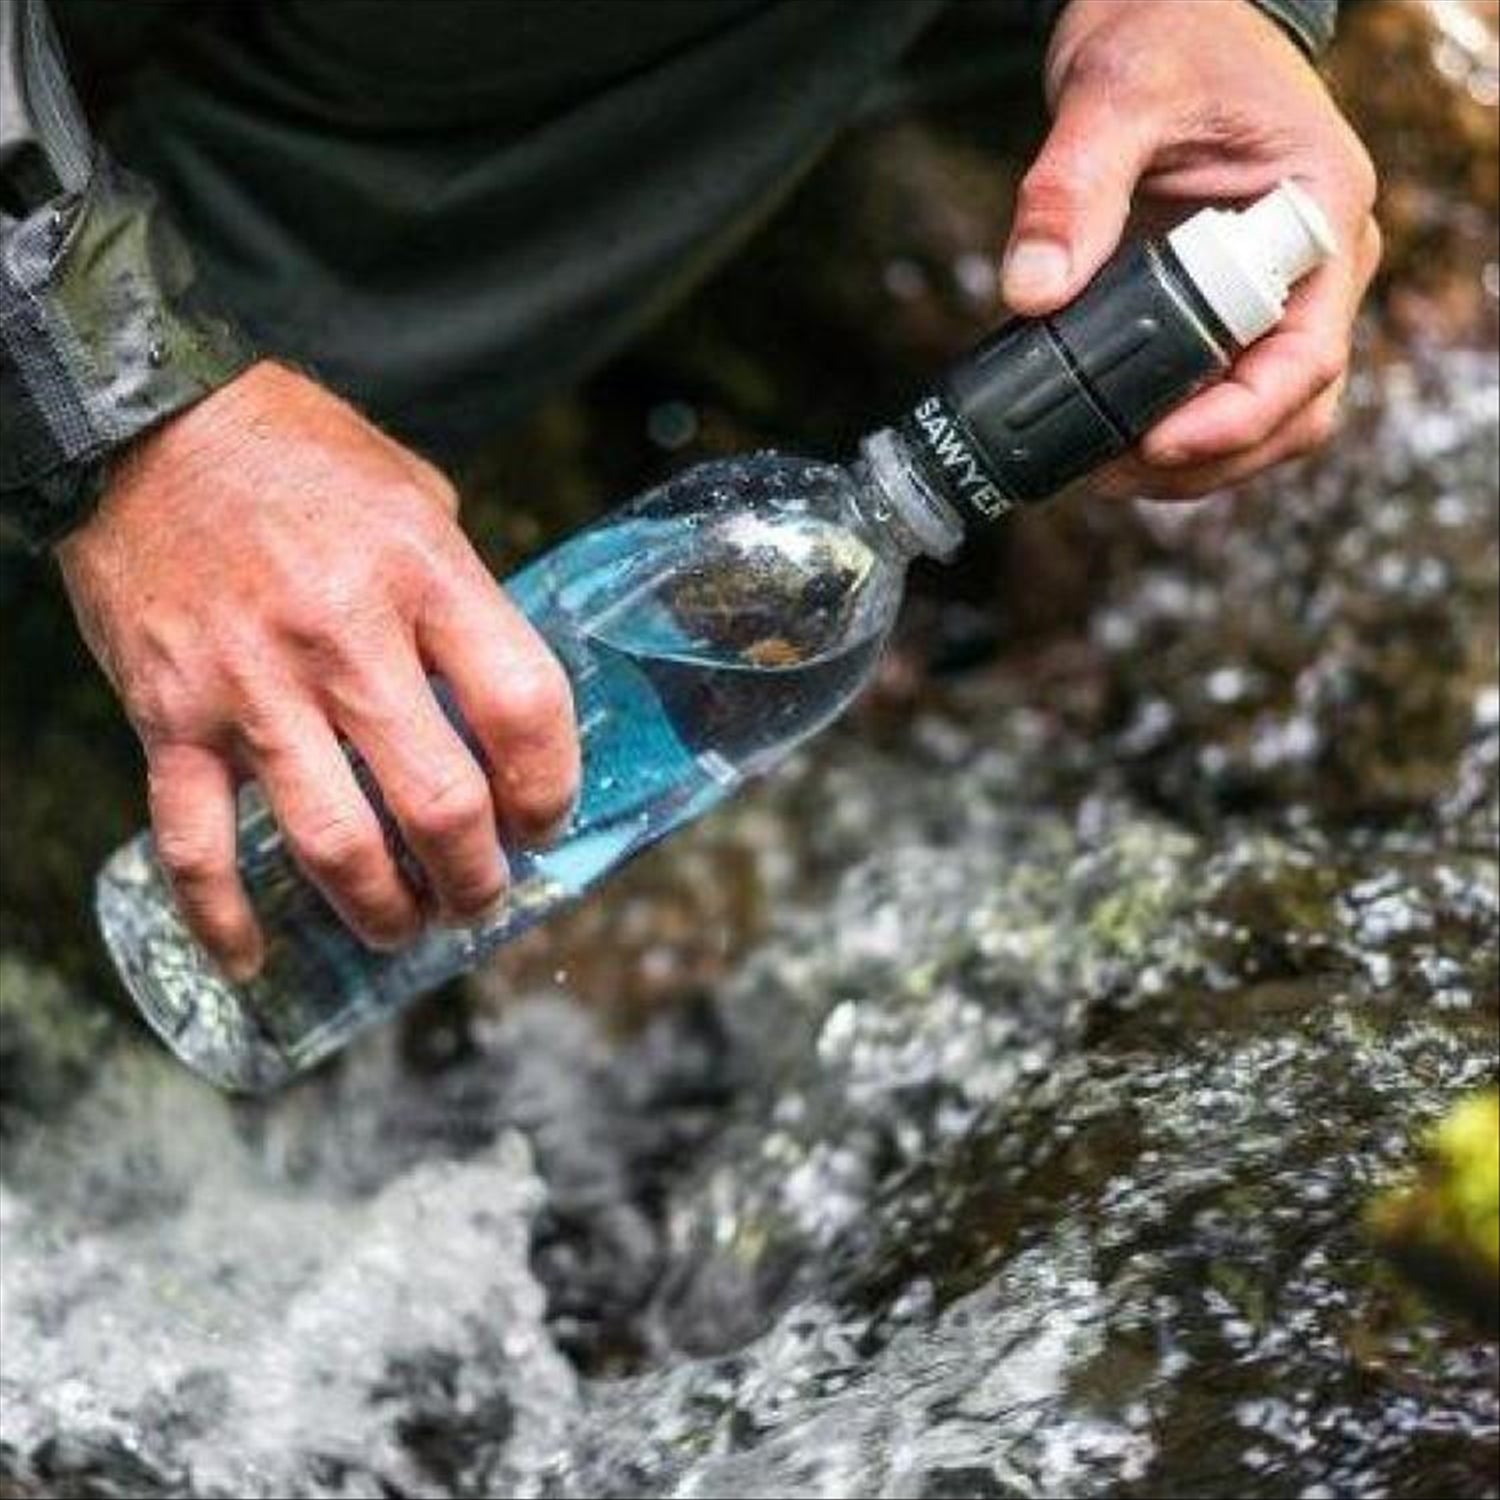 Sawyer Sawyer Micro Squeeze Water Filtration System